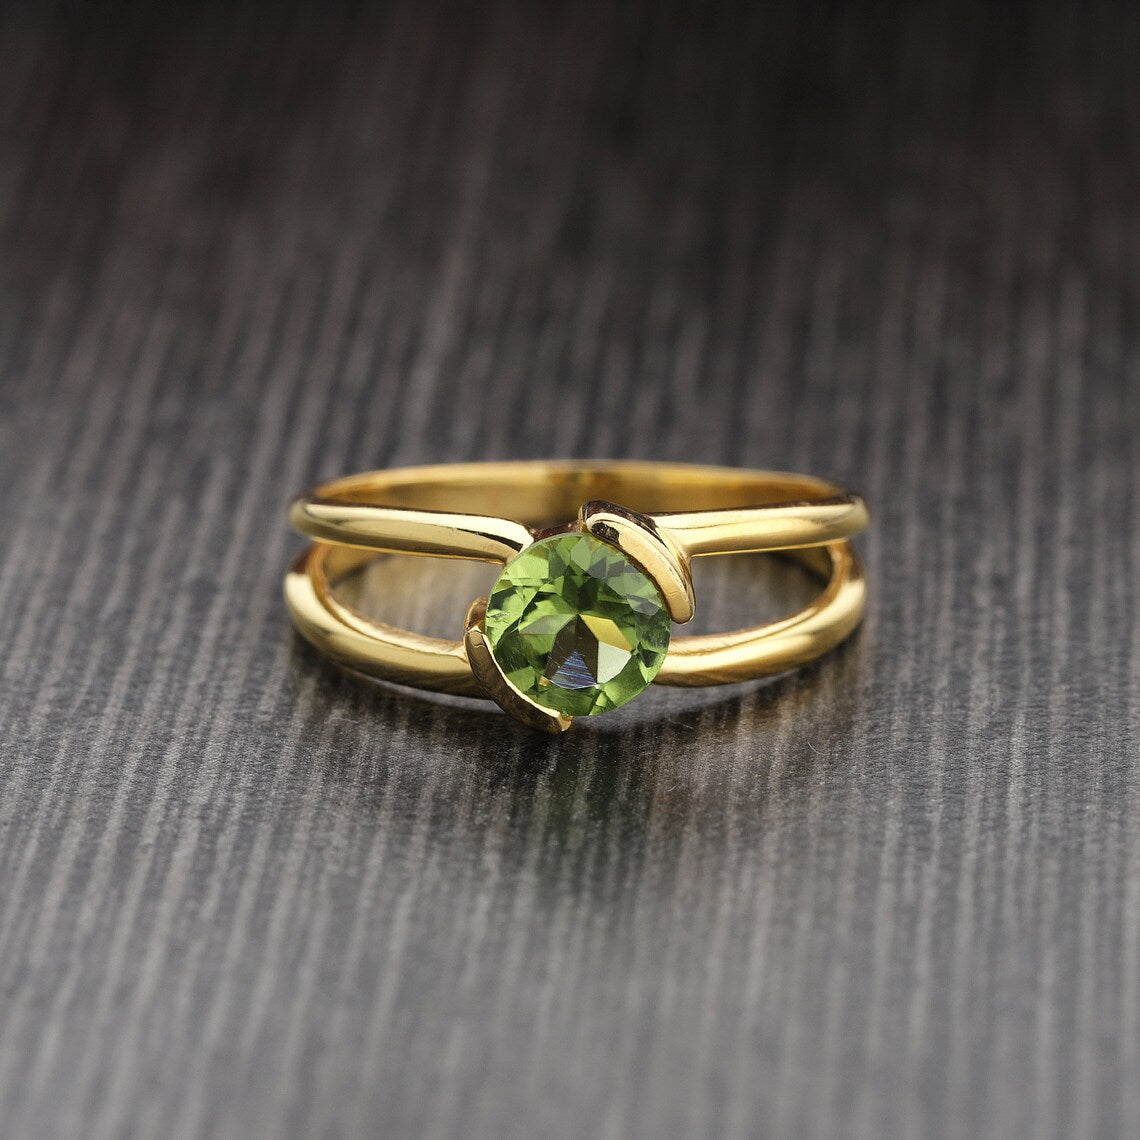 Natural Peridot Ring, Round Cut, Designer Ring, 925 Sterling Silver, August Birthstone Ring, Fashion Ring, Peridot Solitaire Ring